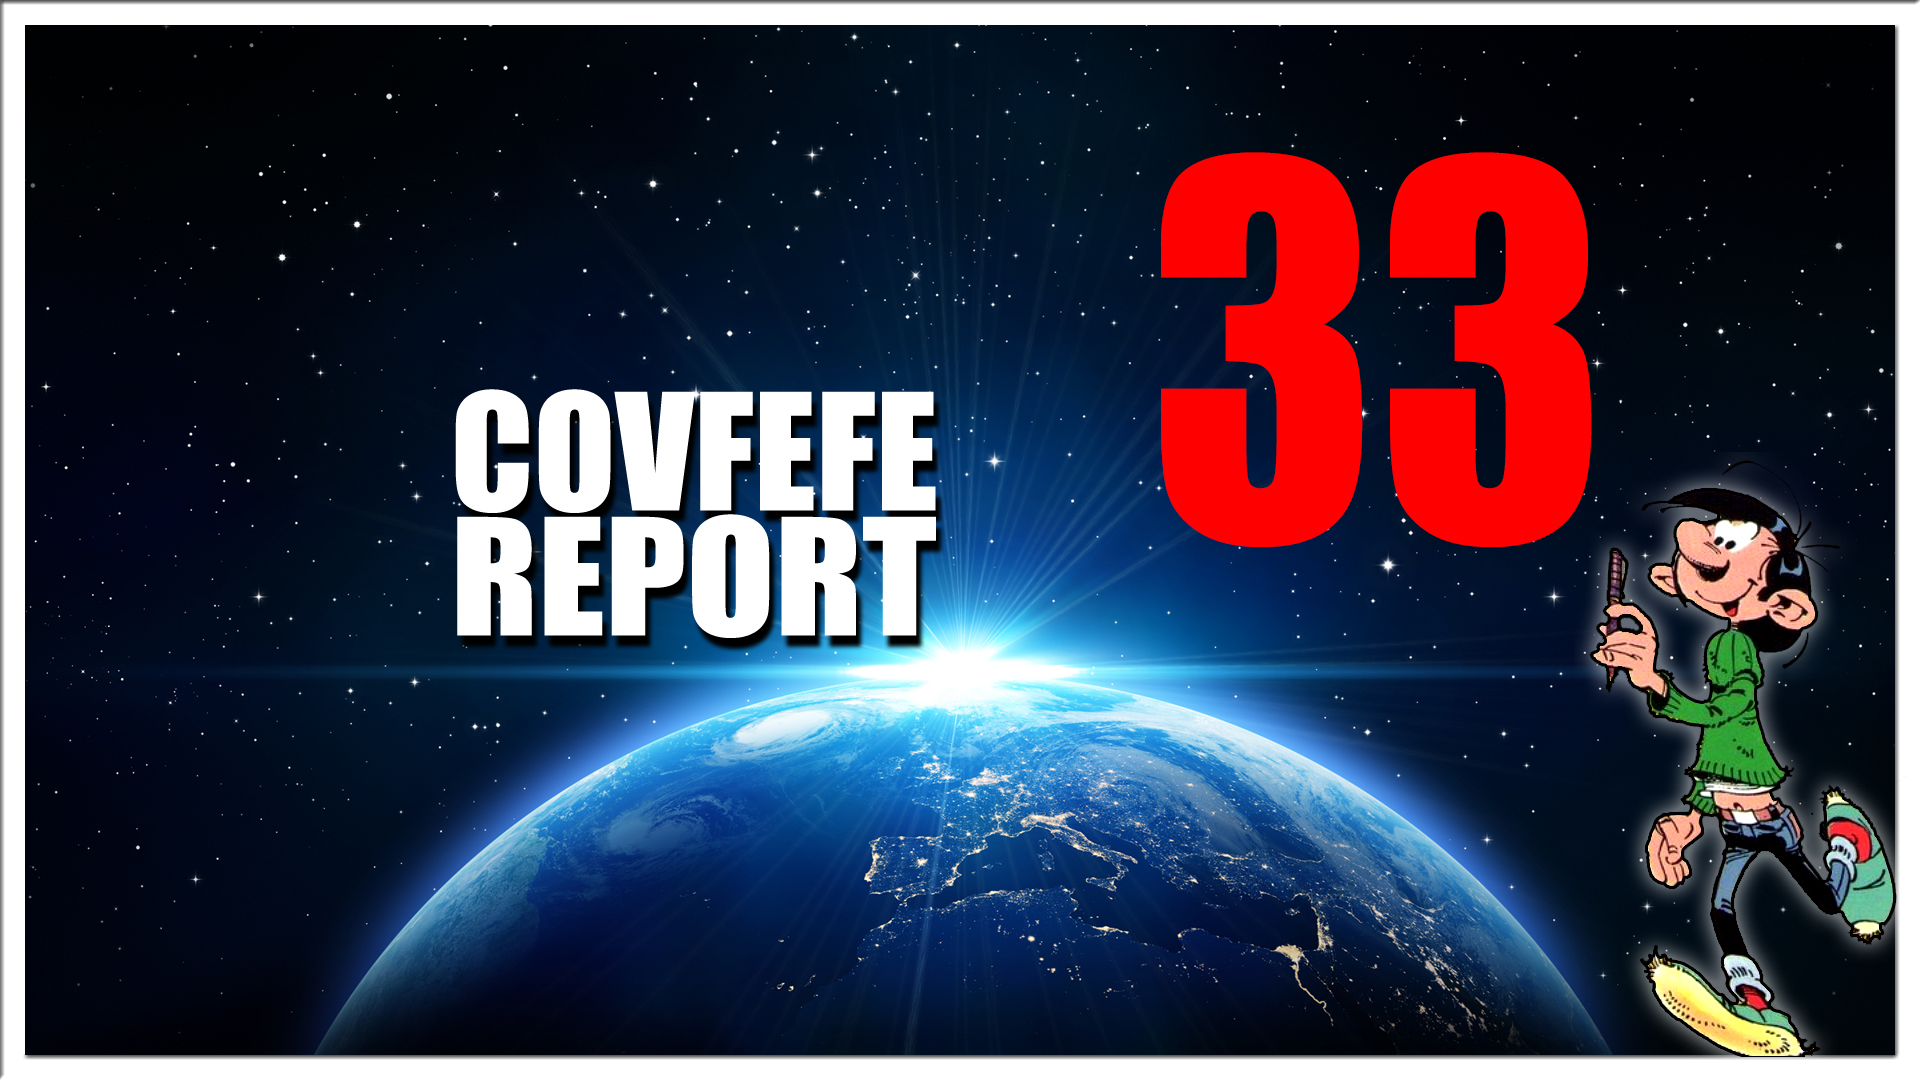 Covfefe Report 33 . Captian Mike Green, Helicopter crash, Rothschild